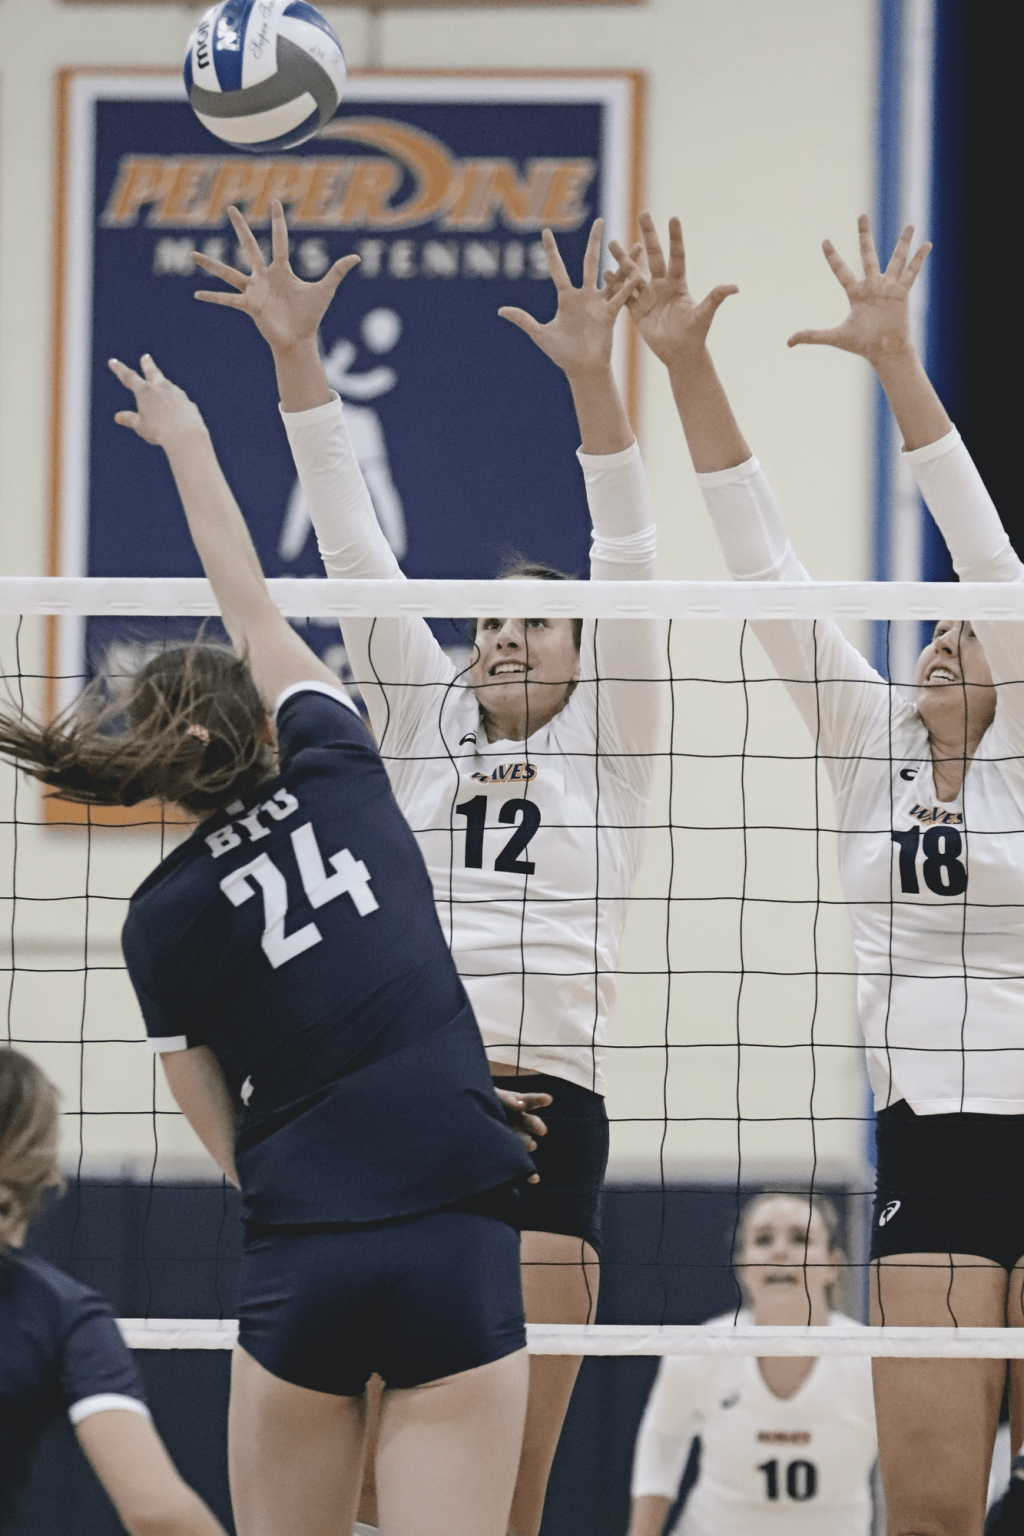 Freshman middle blocker Meg Brown (No. 12) and junior outside hitter Rachel Ahrens (No. 18) elevate for a block attempt Feb. 23. Both Waves were named to the 2021 All-WCC First Team.